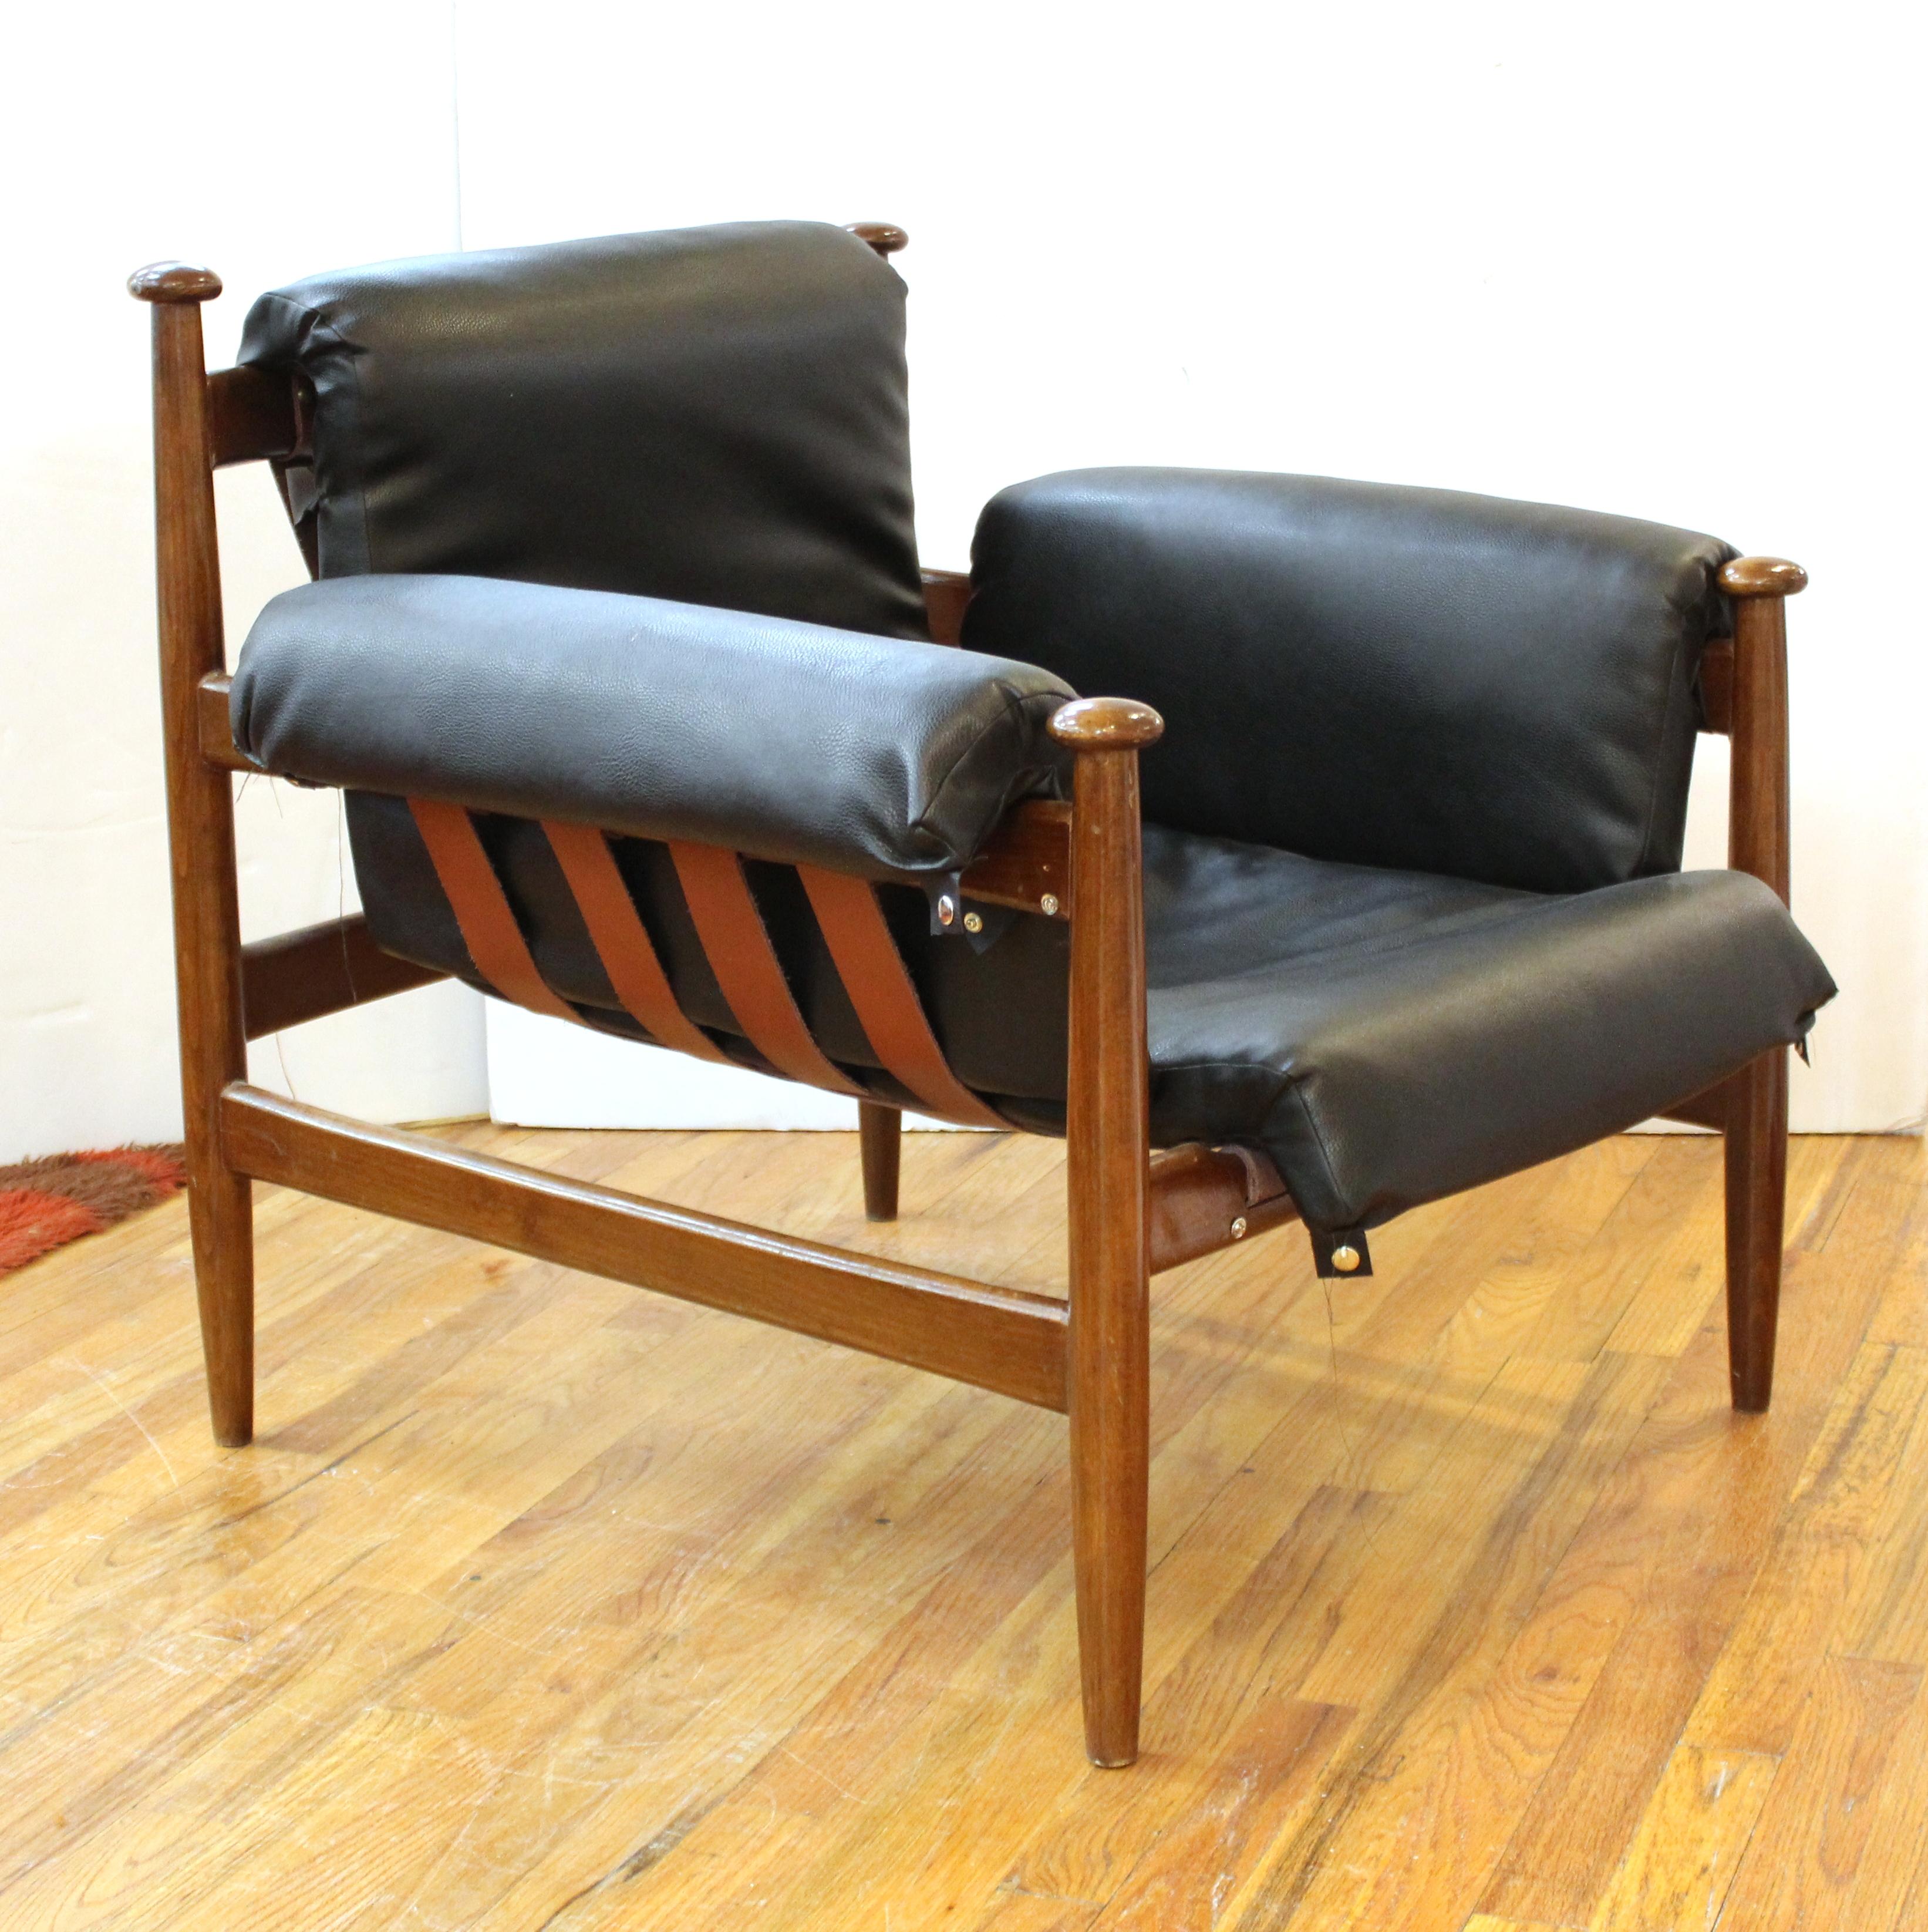 Mid-Century Modern pair of wooden frame lounge chairs or armchairs. The pair has leather upholstery. In great vintage condition with age-appropriate wear and use.